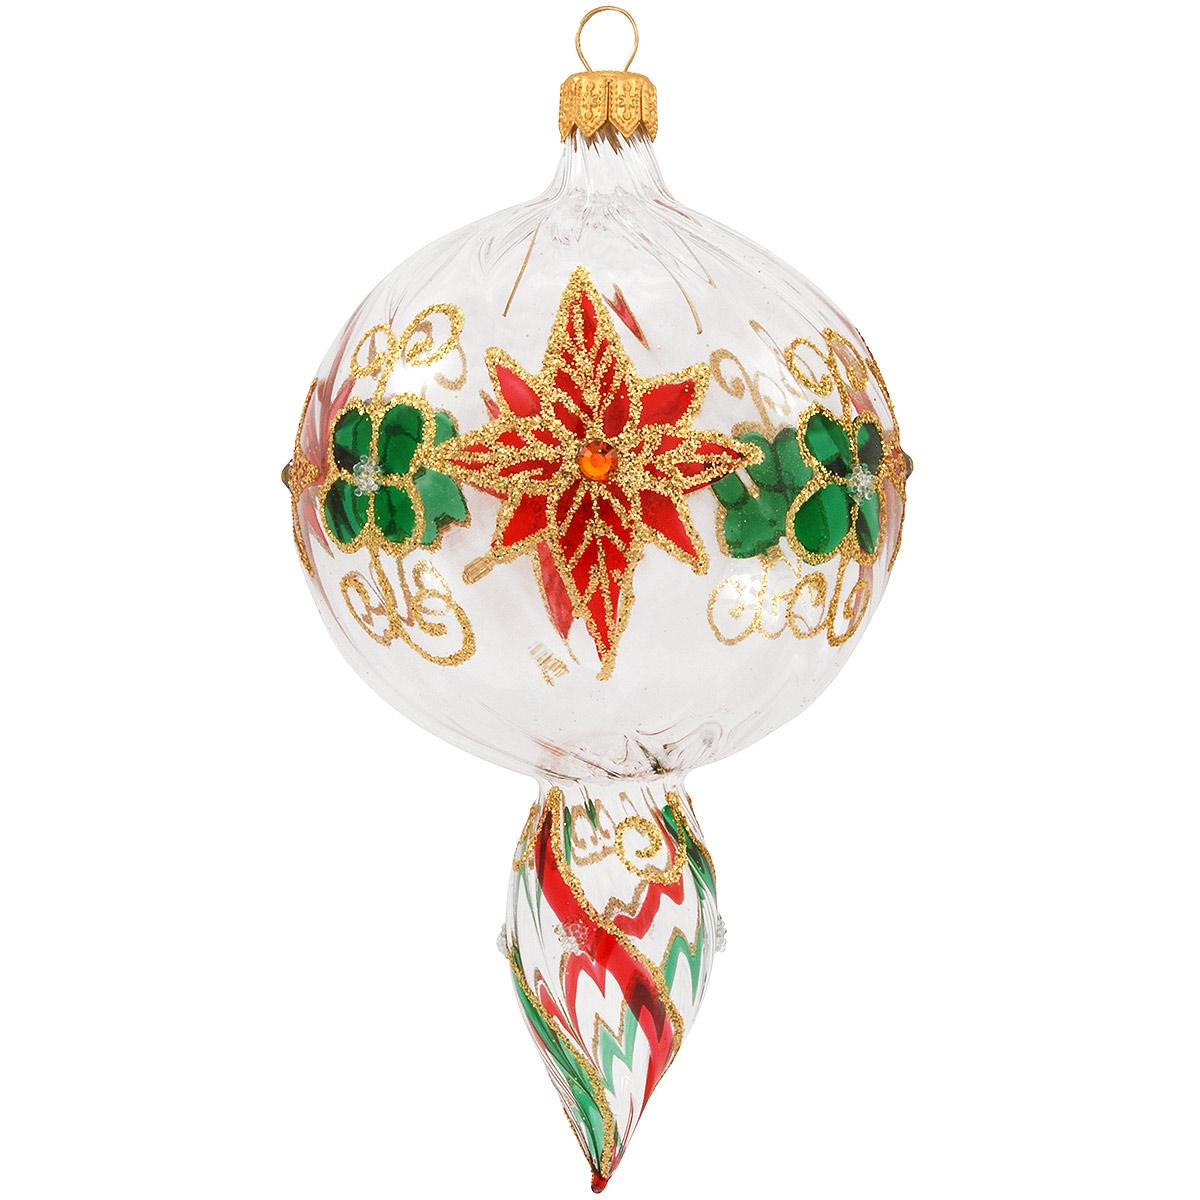 Painted Ornament. Christmas Ornament. Glass Ornament. Clear Ornament. Glass  Paint. Poinsettia Ornament. Poinsettia. Tree Trimming. 